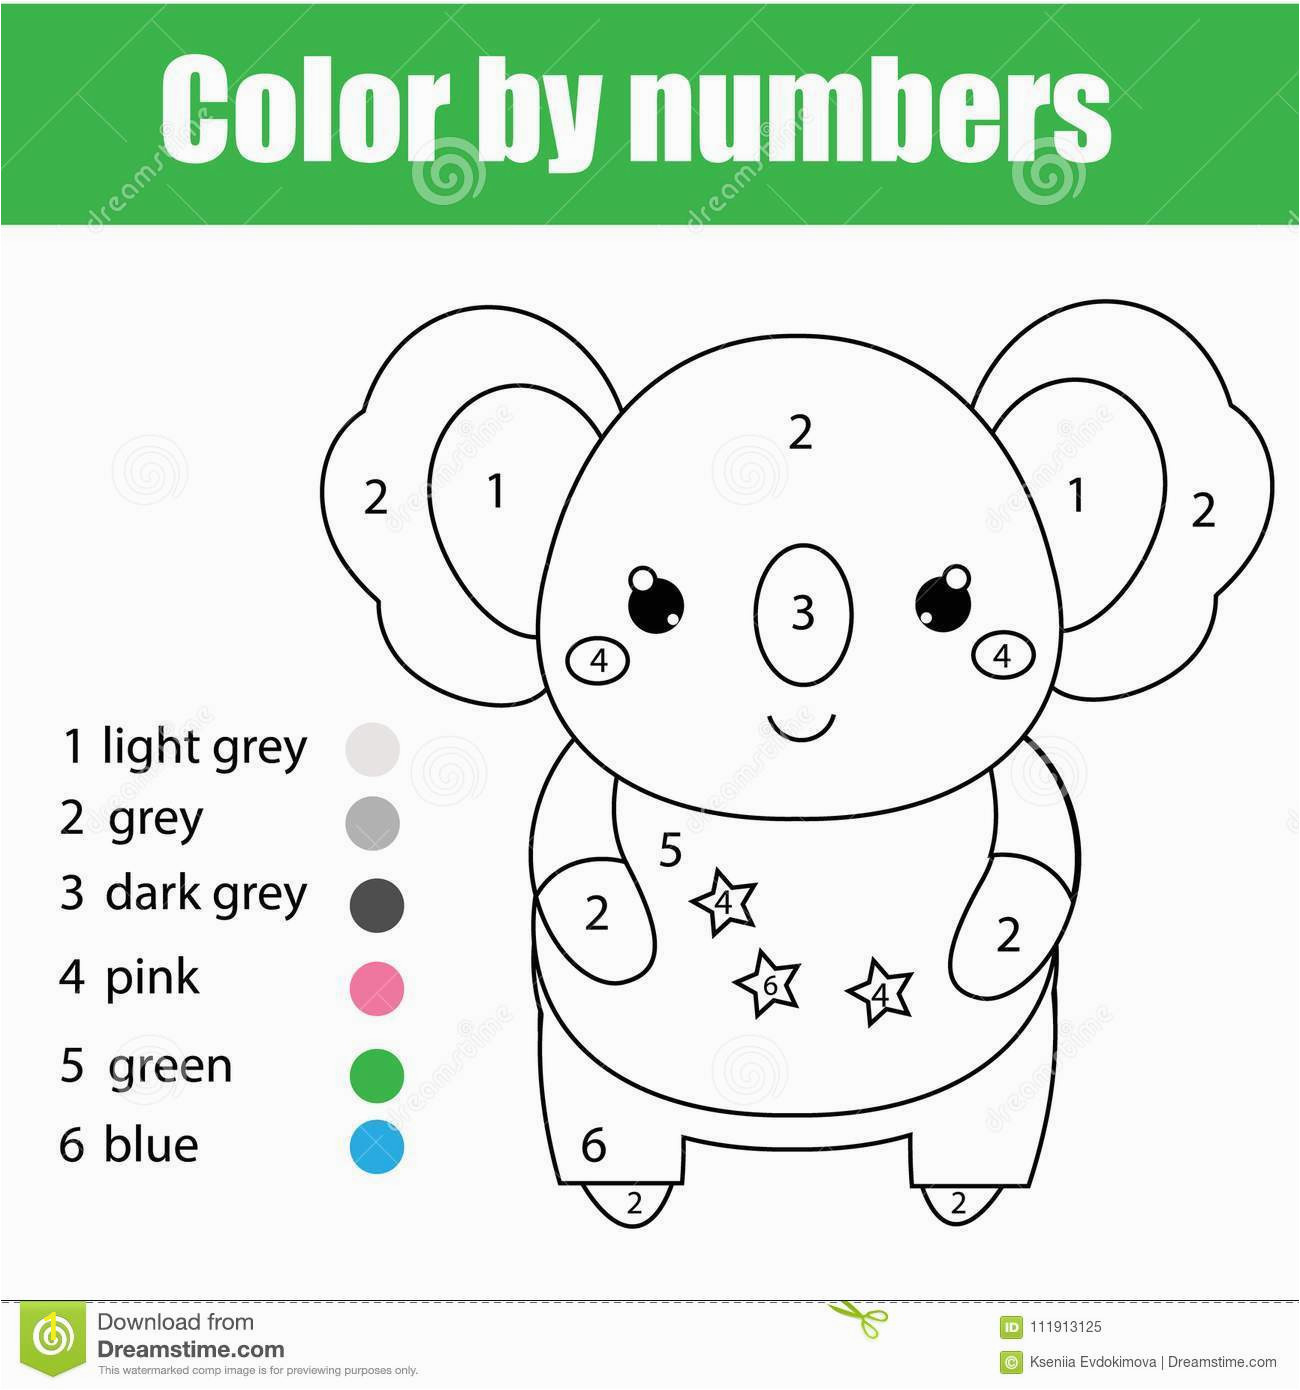 Color by Number Multiplication Coloring Pages Children Educational Game Coloring Page with Cute Koala